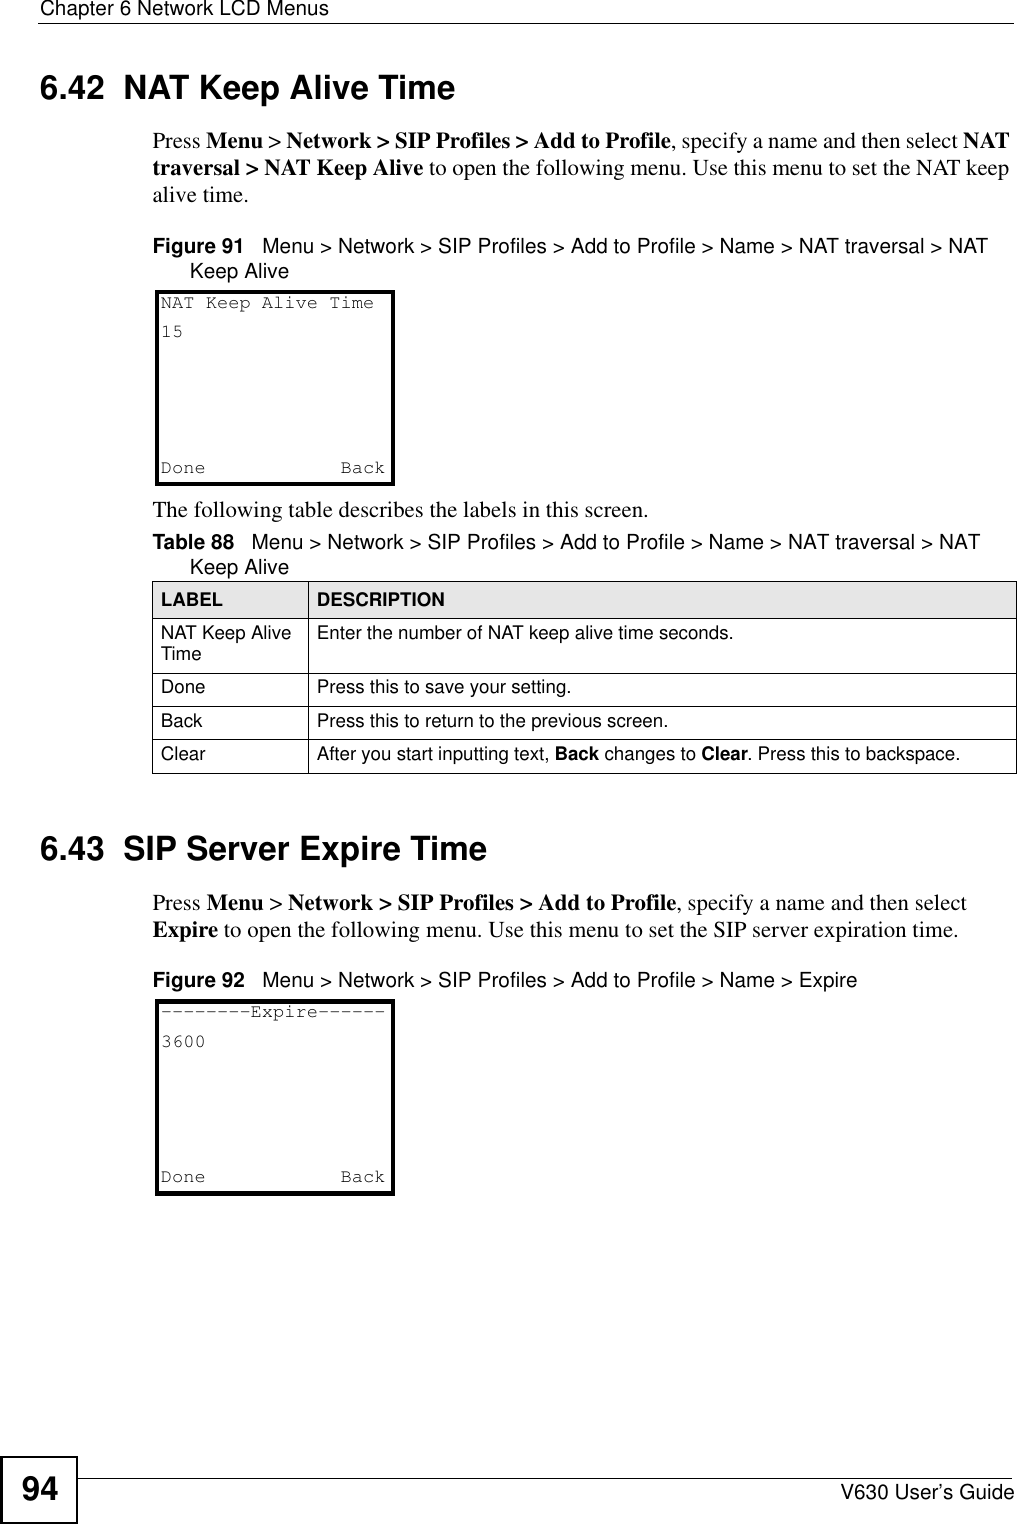 Chapter 6 Network LCD MenusV630 User’s Guide946.42  NAT Keep Alive TimePress Menu &gt; Network &gt; SIP Profiles &gt; Add to Profile, specify a name and then select NAT traversal &gt; NAT Keep Alive to open the following menu. Use this menu to set the NAT keep alive time.Figure 91   Menu &gt; Network &gt; SIP Profiles &gt; Add to Profile &gt; Name &gt; NAT traversal &gt; NAT Keep AliveThe following table describes the labels in this screen.6.43  SIP Server Expire TimePress Menu &gt; Network &gt; SIP Profiles &gt; Add to Profile, specify a name and then select Expire to open the following menu. Use this menu to set the SIP server expiration time.Figure 92   Menu &gt; Network &gt; SIP Profiles &gt; Add to Profile &gt; Name &gt; ExpireTable 88   Menu &gt; Network &gt; SIP Profiles &gt; Add to Profile &gt; Name &gt; NAT traversal &gt; NAT Keep AliveLABEL DESCRIPTIONNAT Keep Alive Time Enter the number of NAT keep alive time seconds.Done Press this to save your setting. Back Press this to return to the previous screen. Clear After you start inputting text, Back changes to Clear. Press this to backspace.NAT Keep Alive Time15Done   Back--------Expire------3600Done   Back